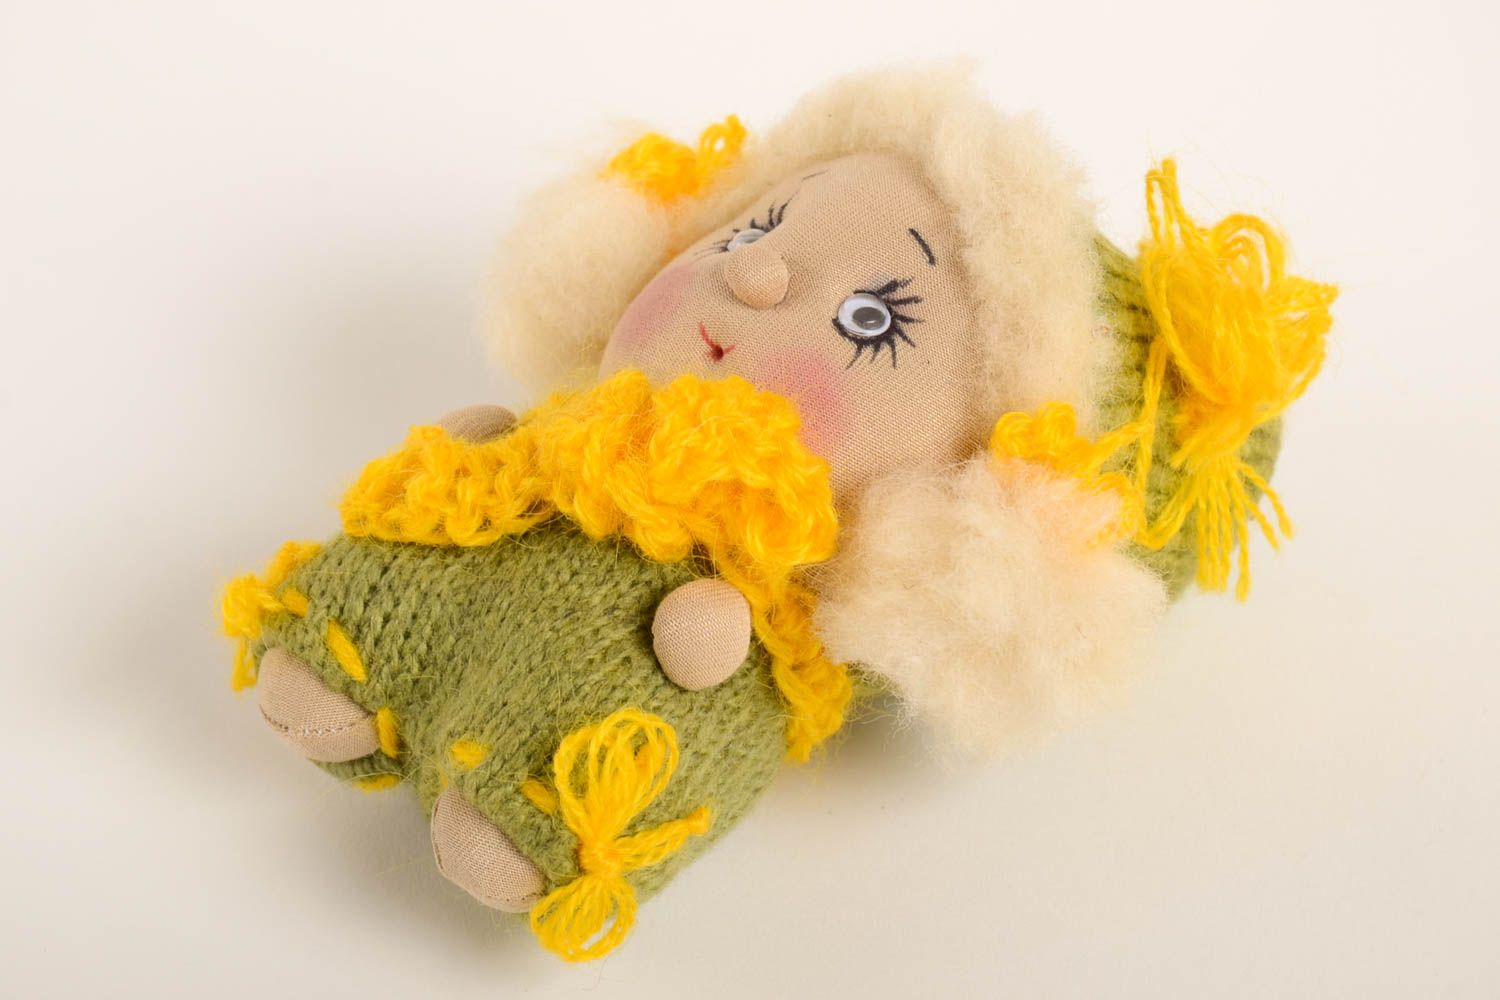 Cute designer soft toy interesting unusual accessories lovely handmade doll photo 4